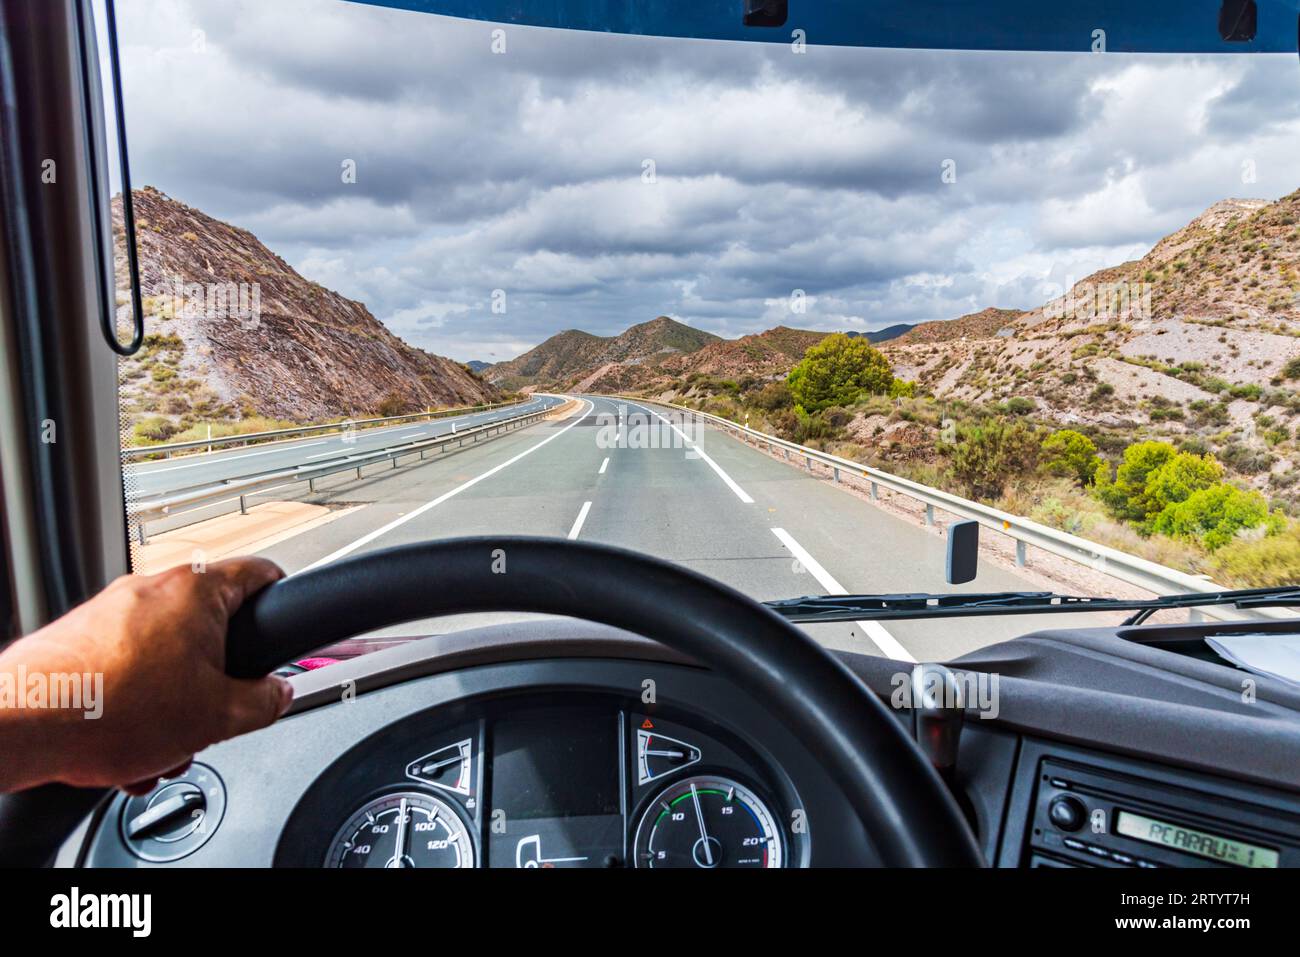 View from the driving position of a truck of the highway and a mountainous landscape. Stock Photo